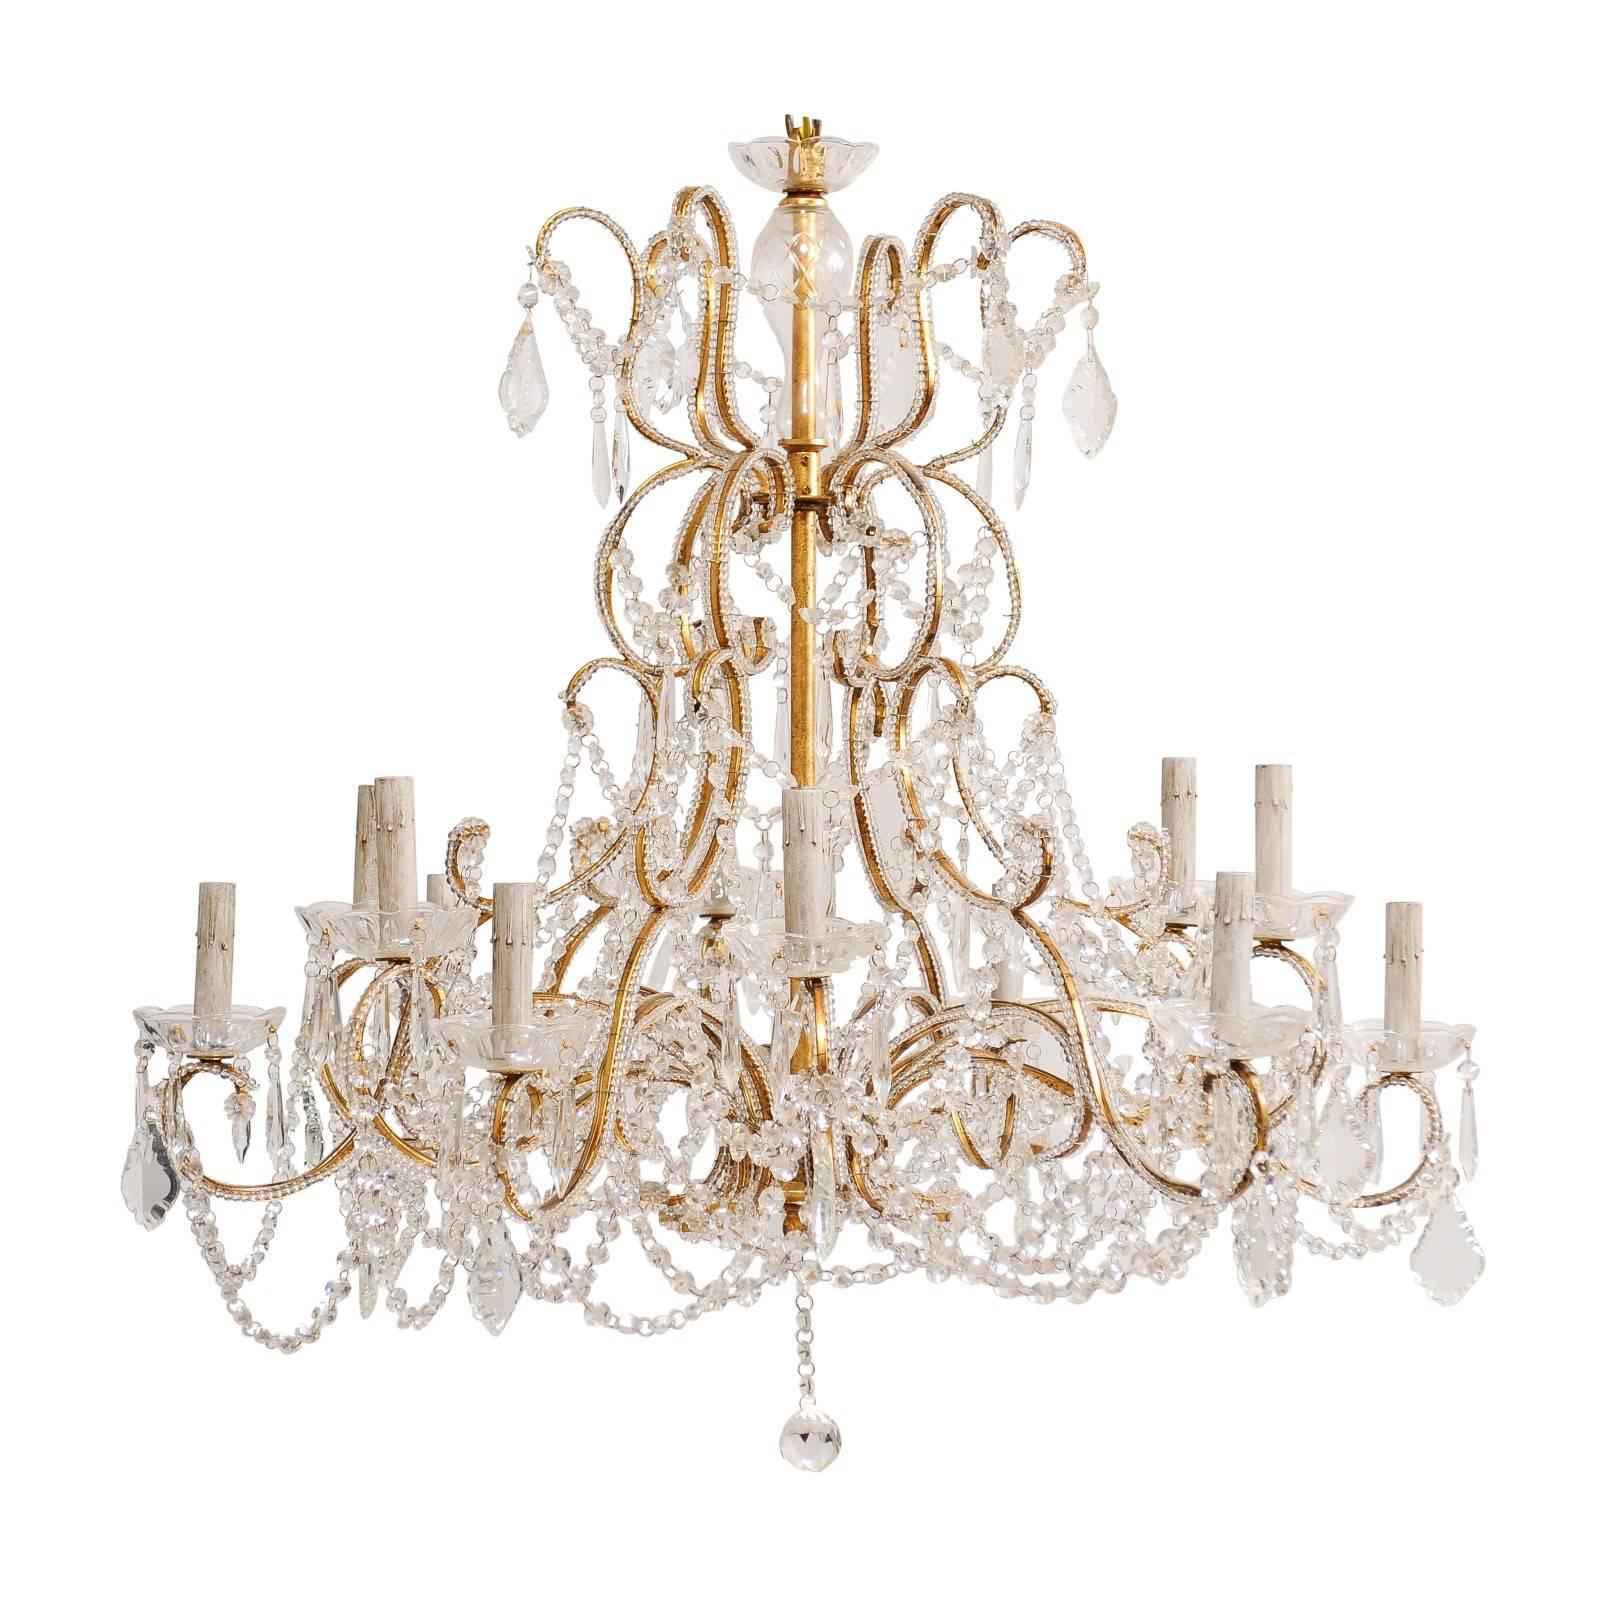 French Mid-20th Century Twelve-Light Crystal Chandelier with Gilded Iron Arms